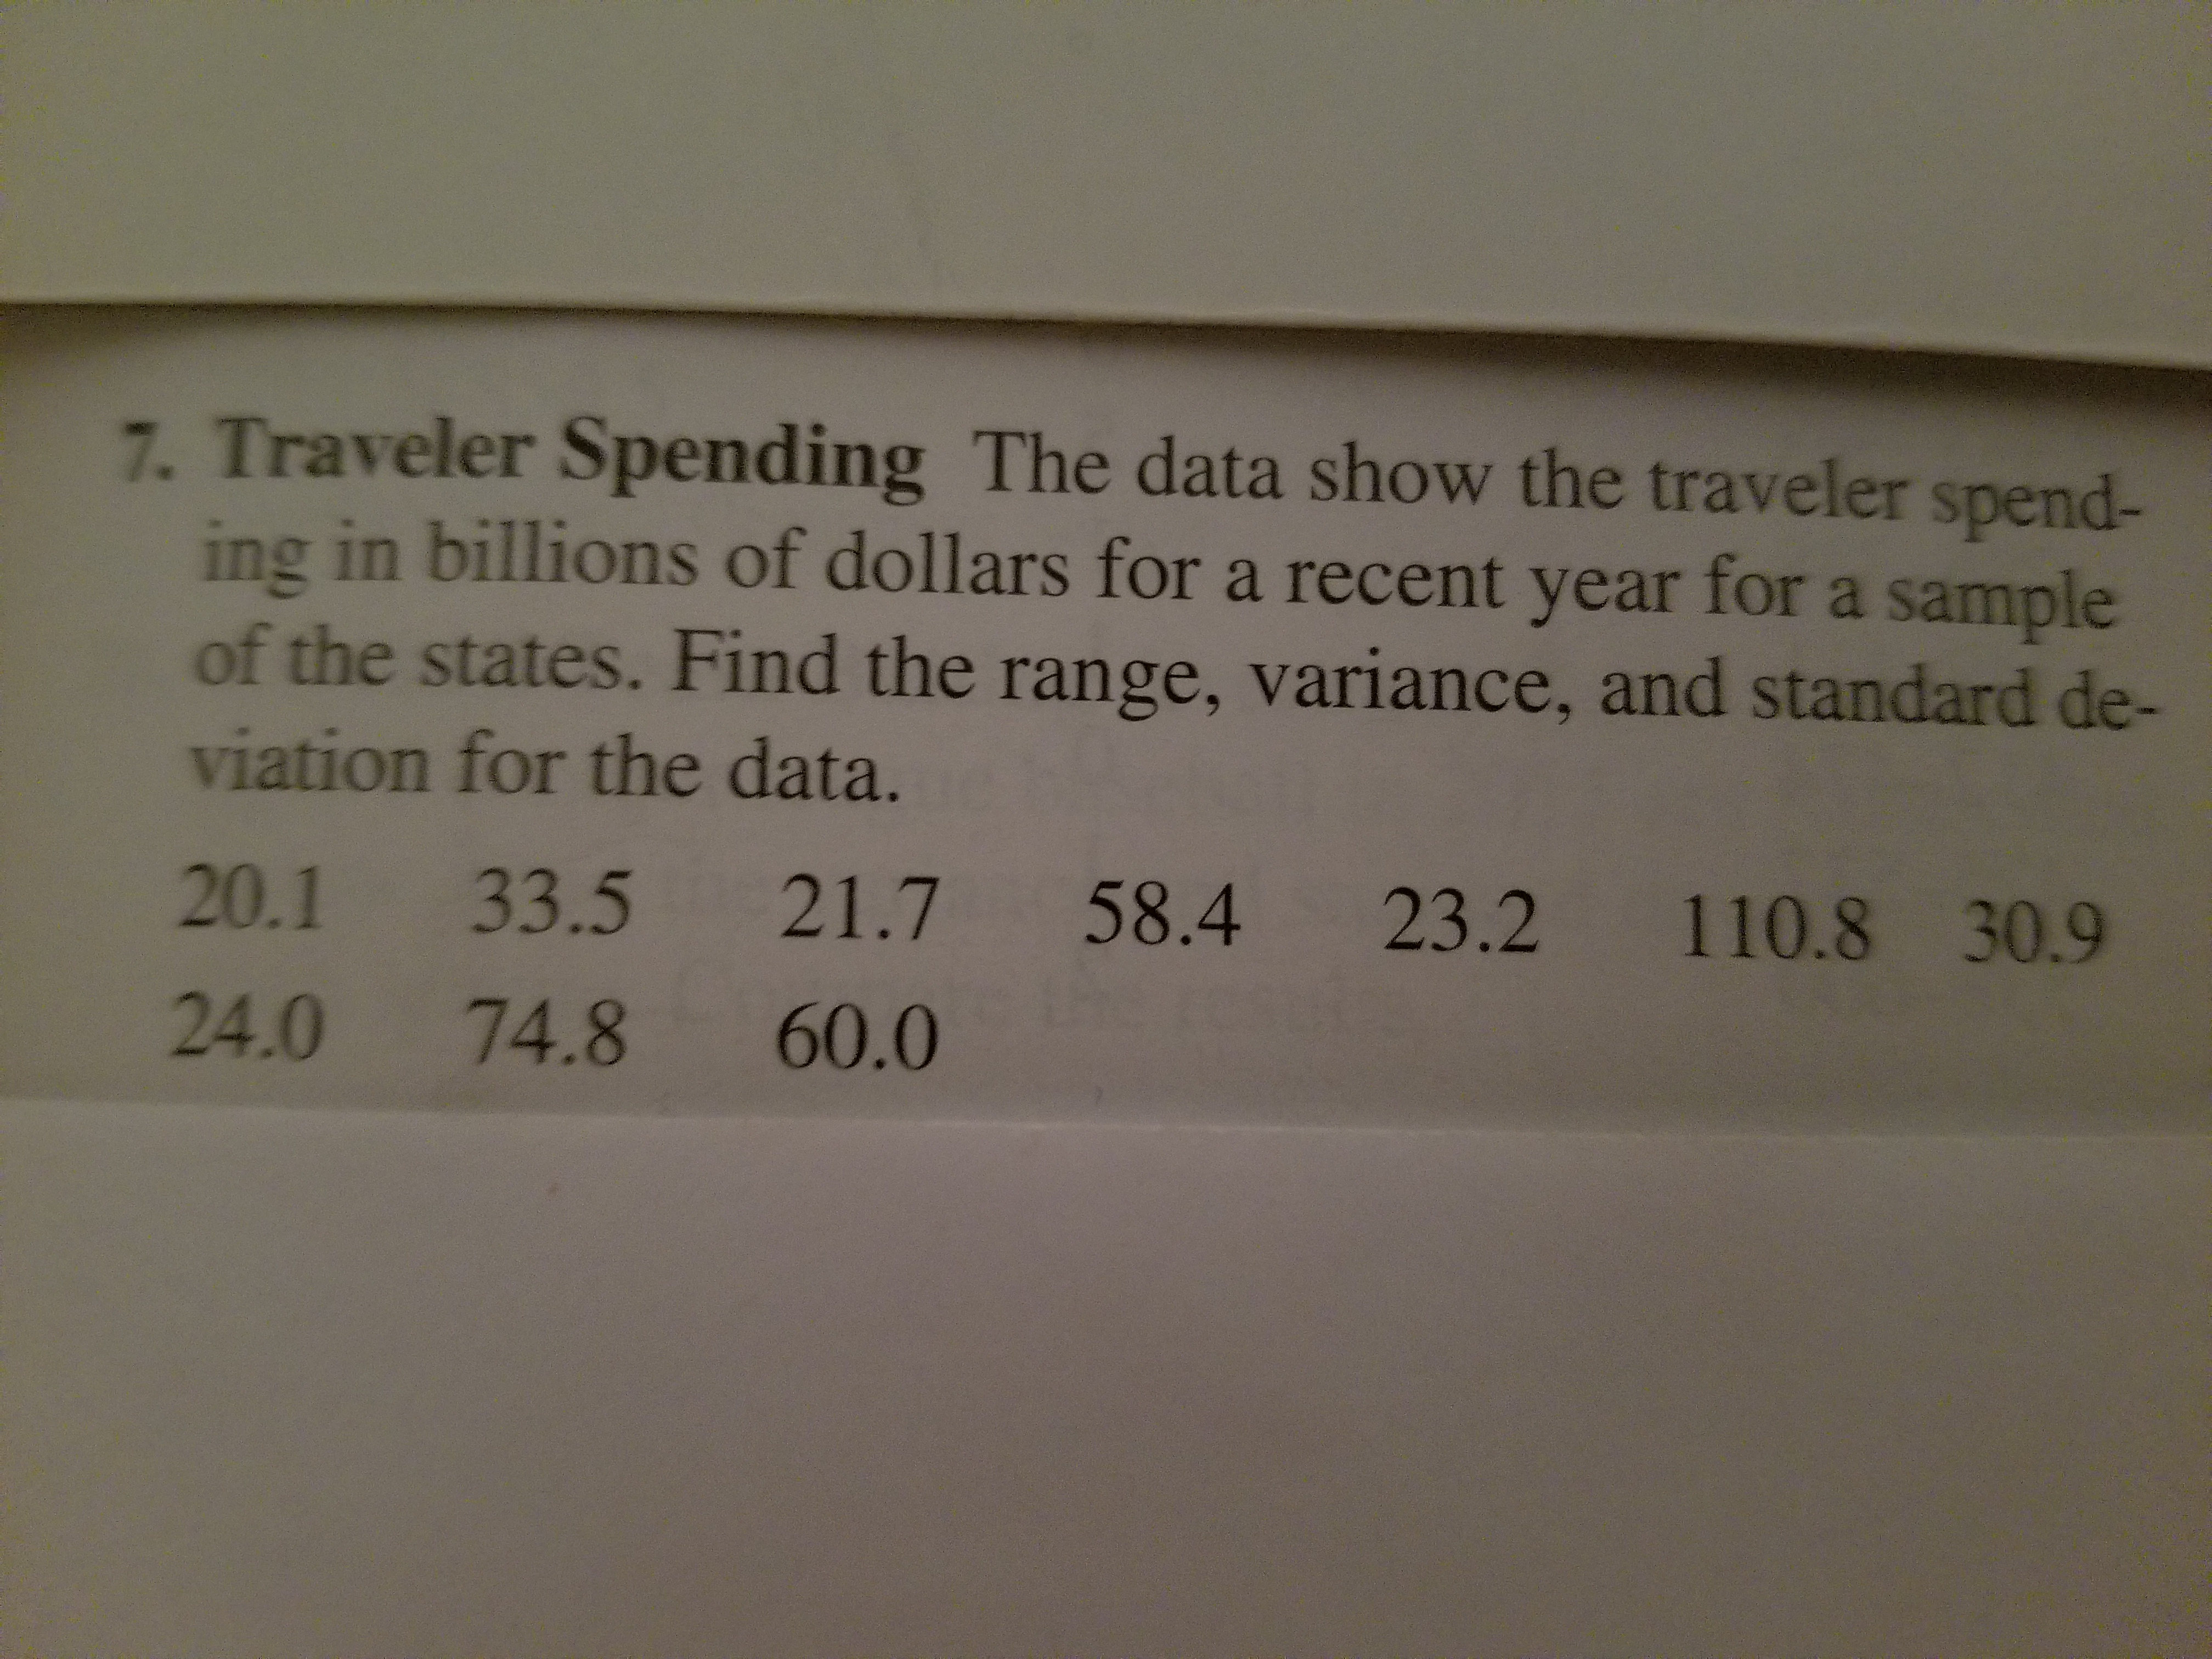 7. Traveler Spending The data show the traveler spend-
ing in billions of dollars for a recent year for a sample
of the states. Find the range, variance, and standard de-
viation for the data.
20.1 33.5 21.7 58.4 23.2 110.8 30.9
24.0 74.8 60.0
